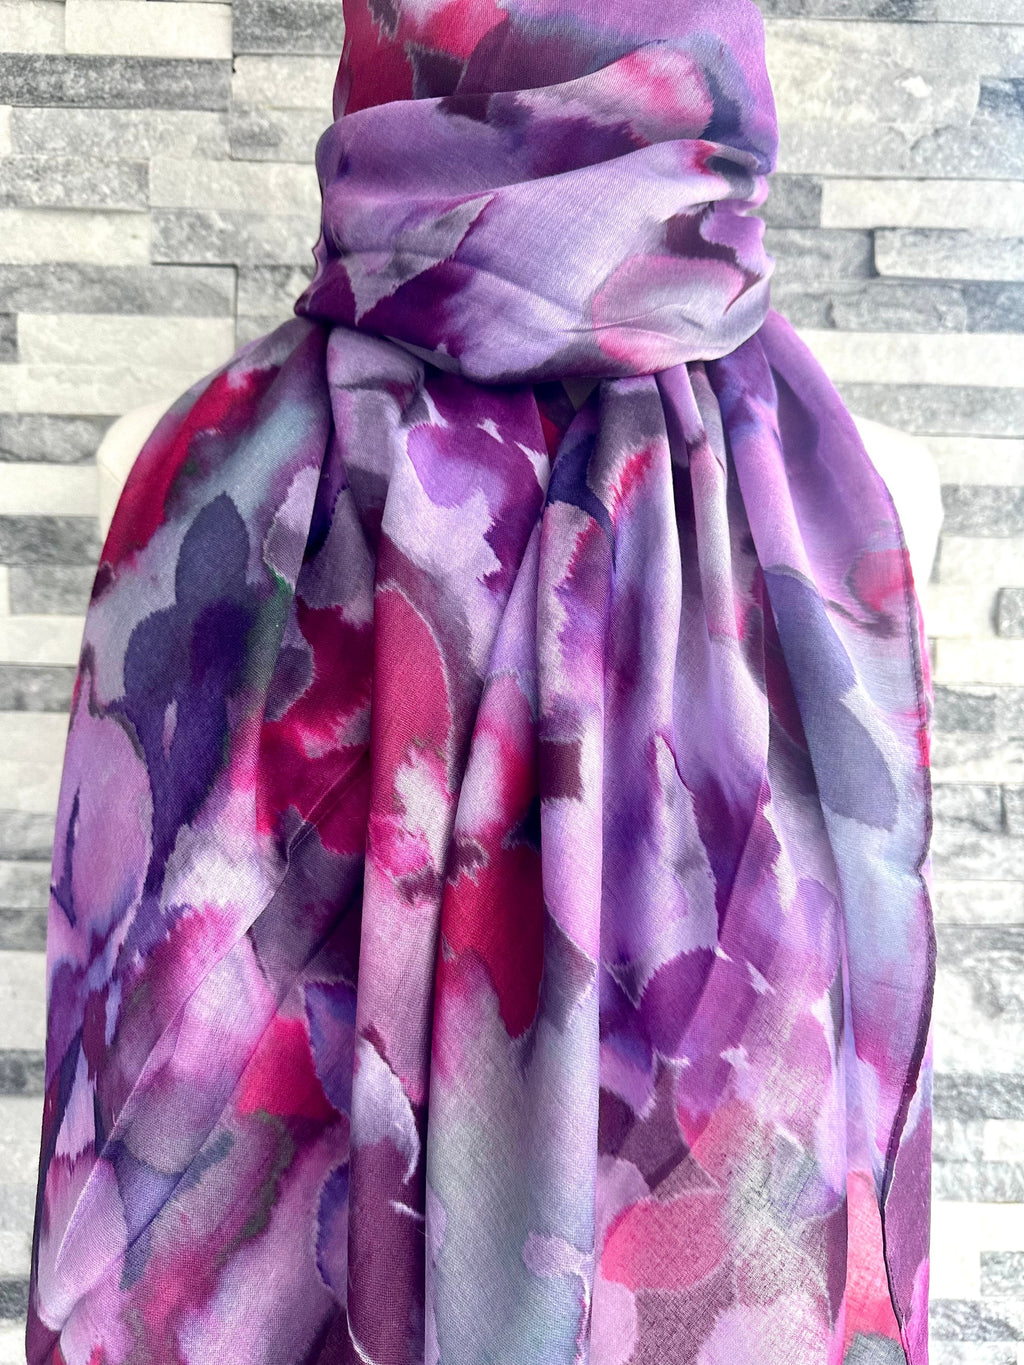 lusciousscarves Ladies Water coloured Floral Shapes Scarf,  Lilac, Purple, Pink and Maroon .